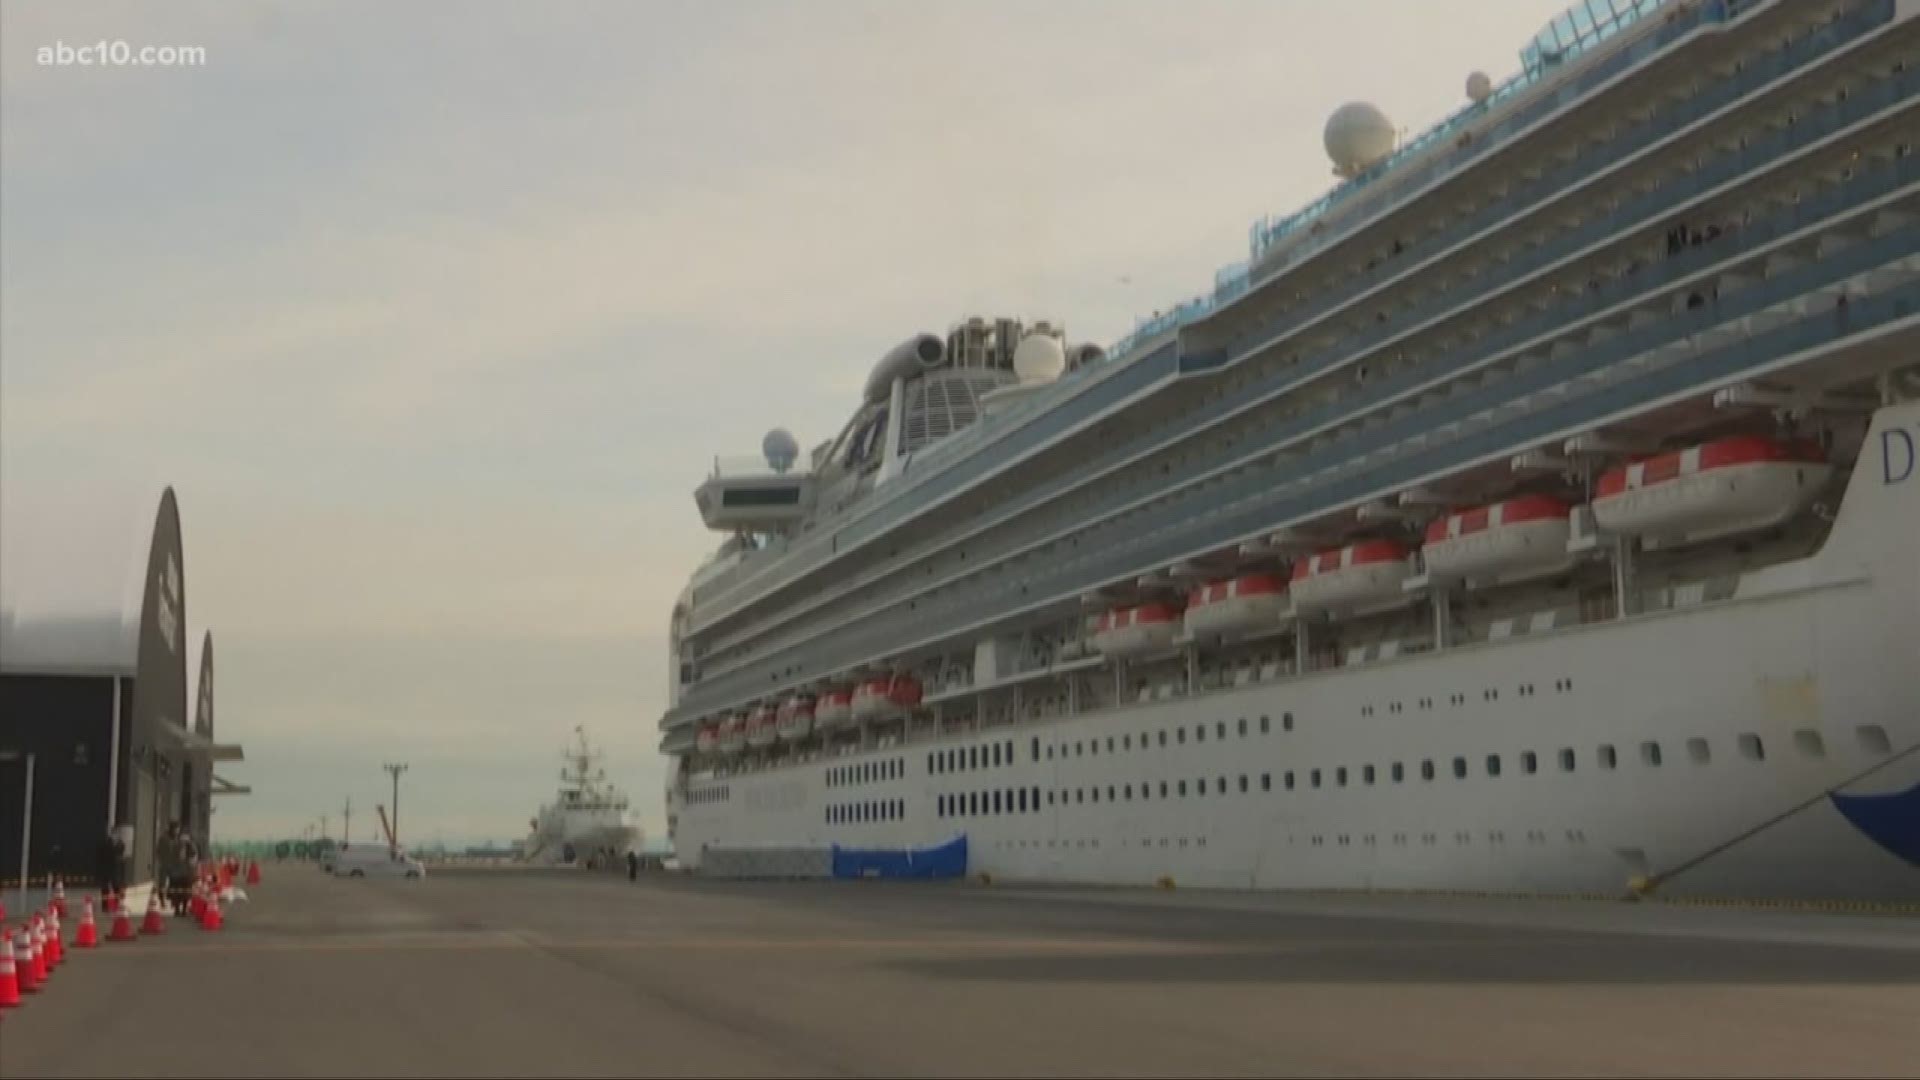 American officials are evacuating nearly 400 U.S. citizens who have been quarantined aboard a cruise ship in Japan over concerns of spreading the Coronavirus.